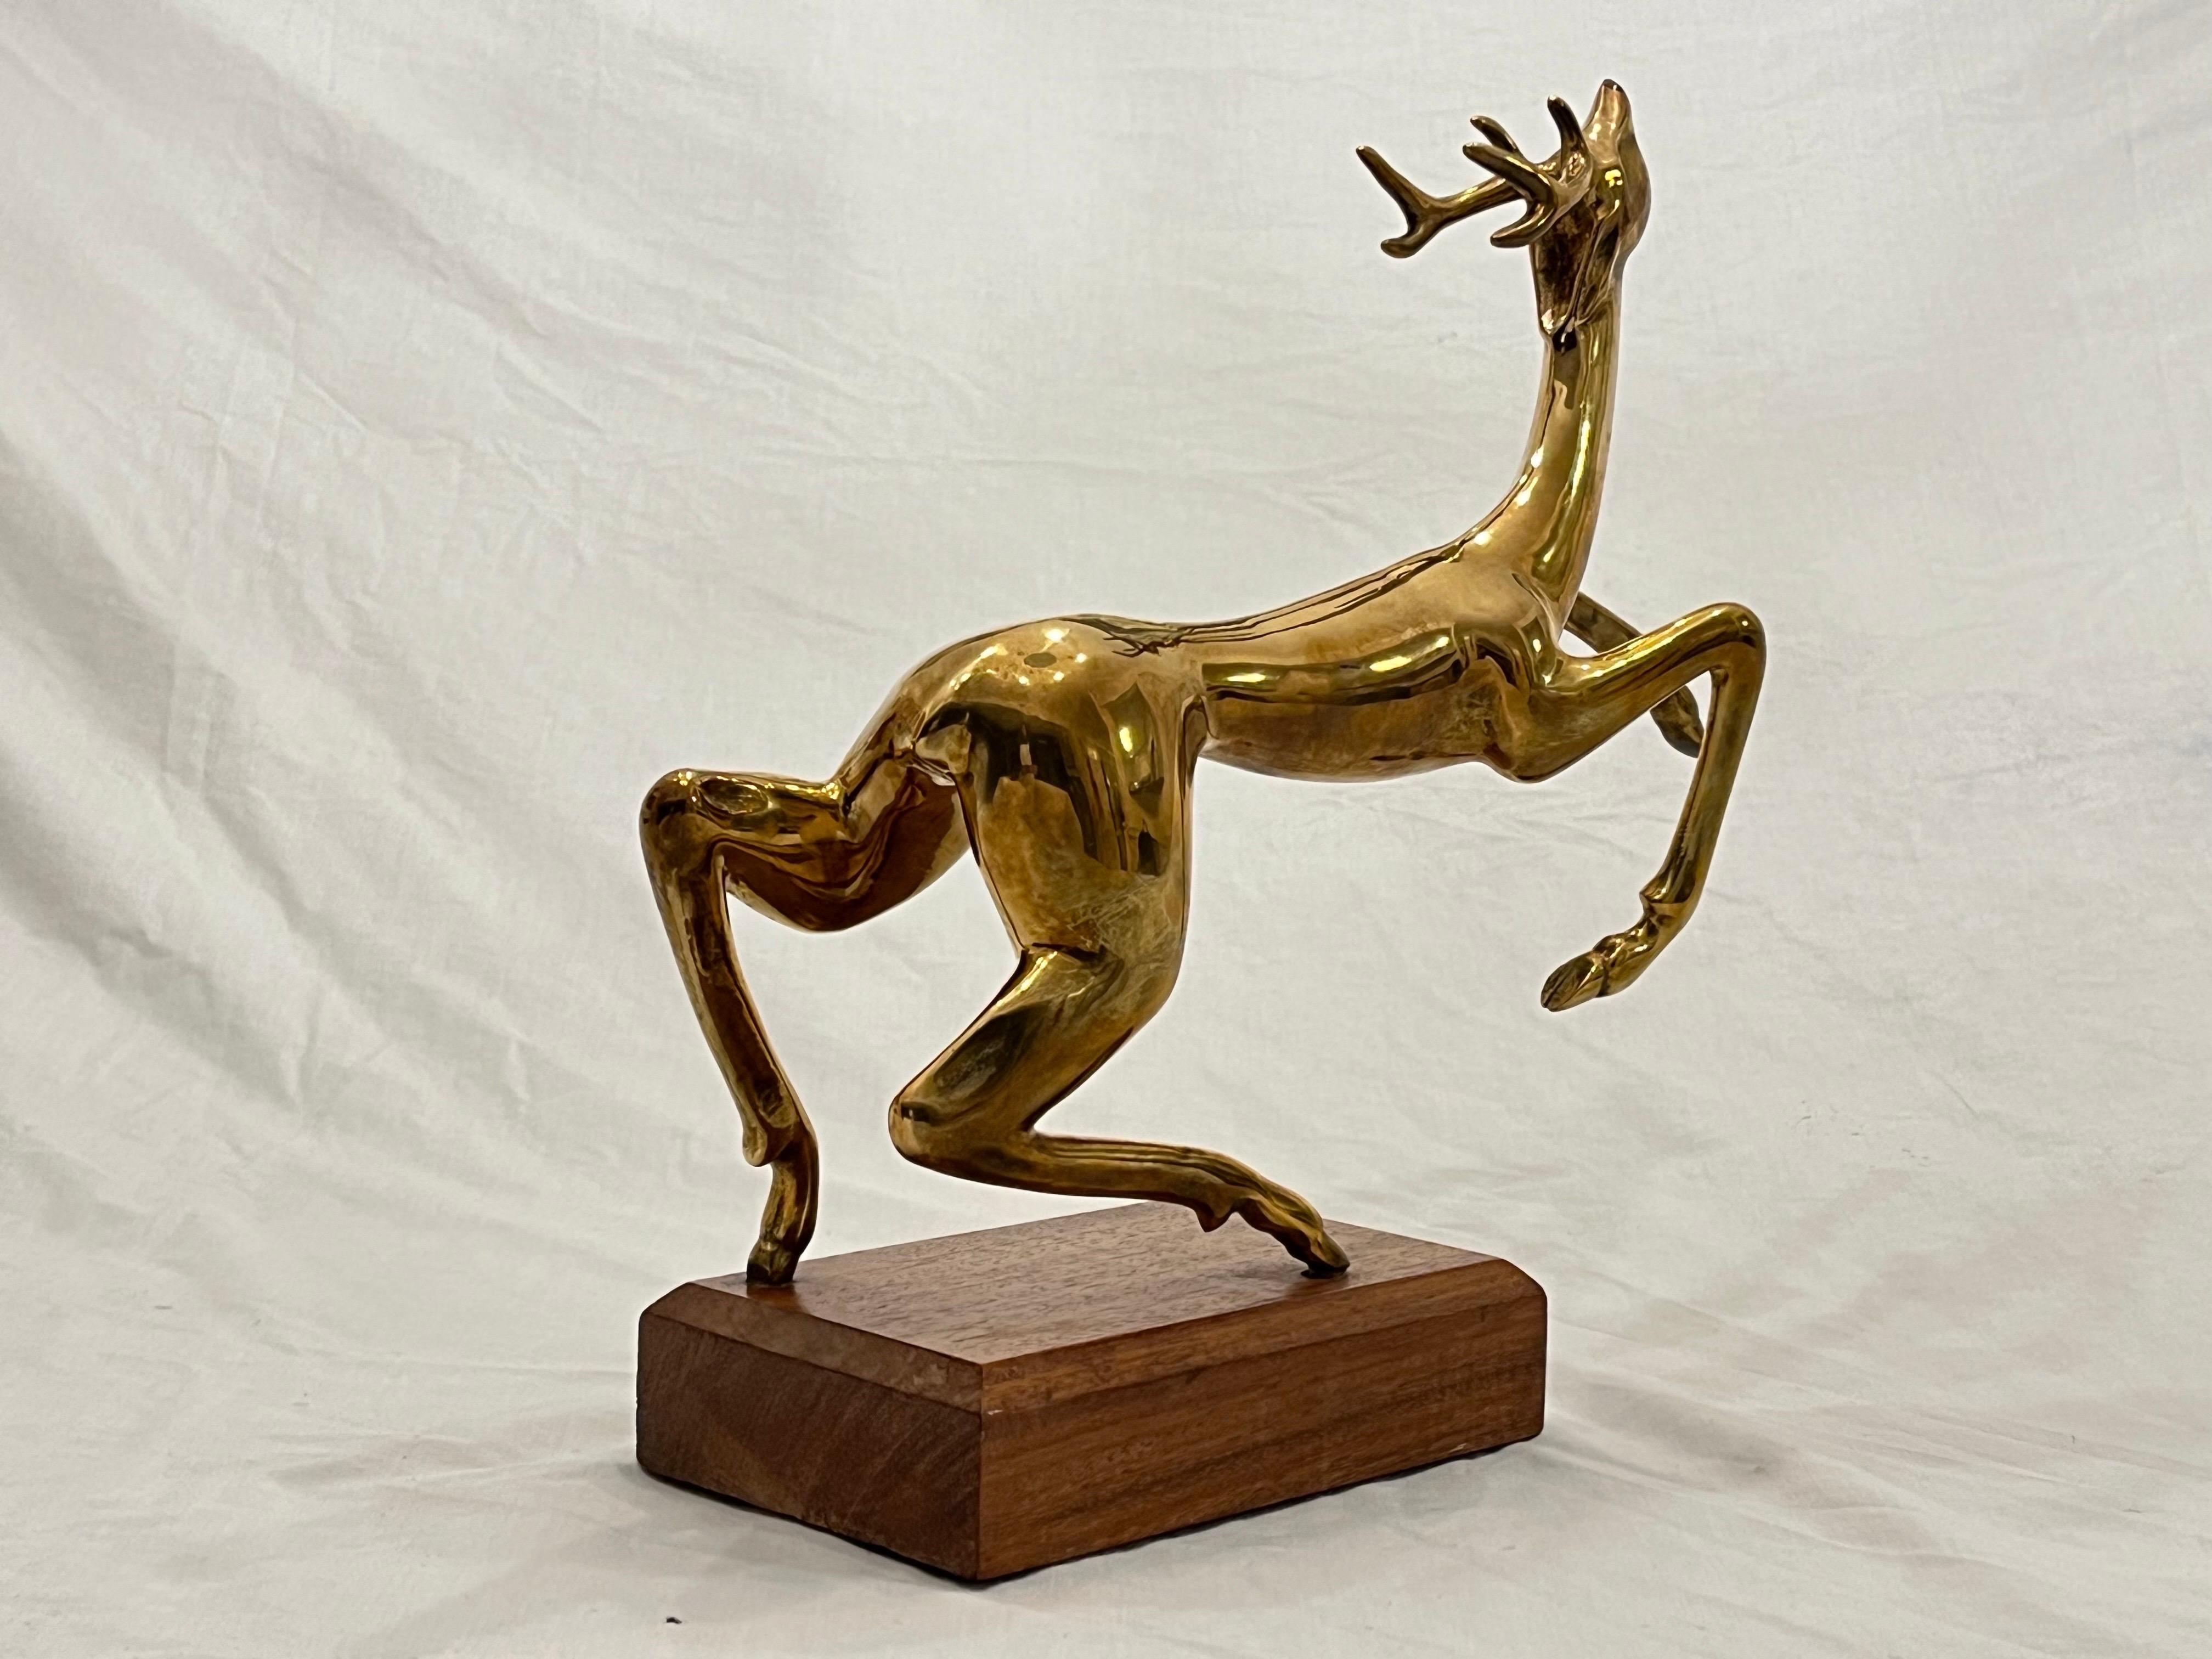 A vintage, circa 1970's, late 20th century solid bronze abstract animal sculpture by Hattakitkosol Somchai (1934 - 2000). This sculpture depicts a fluid, leaping deer or reindeer with antlers. The work is signed Somchai and the edition number A15 /